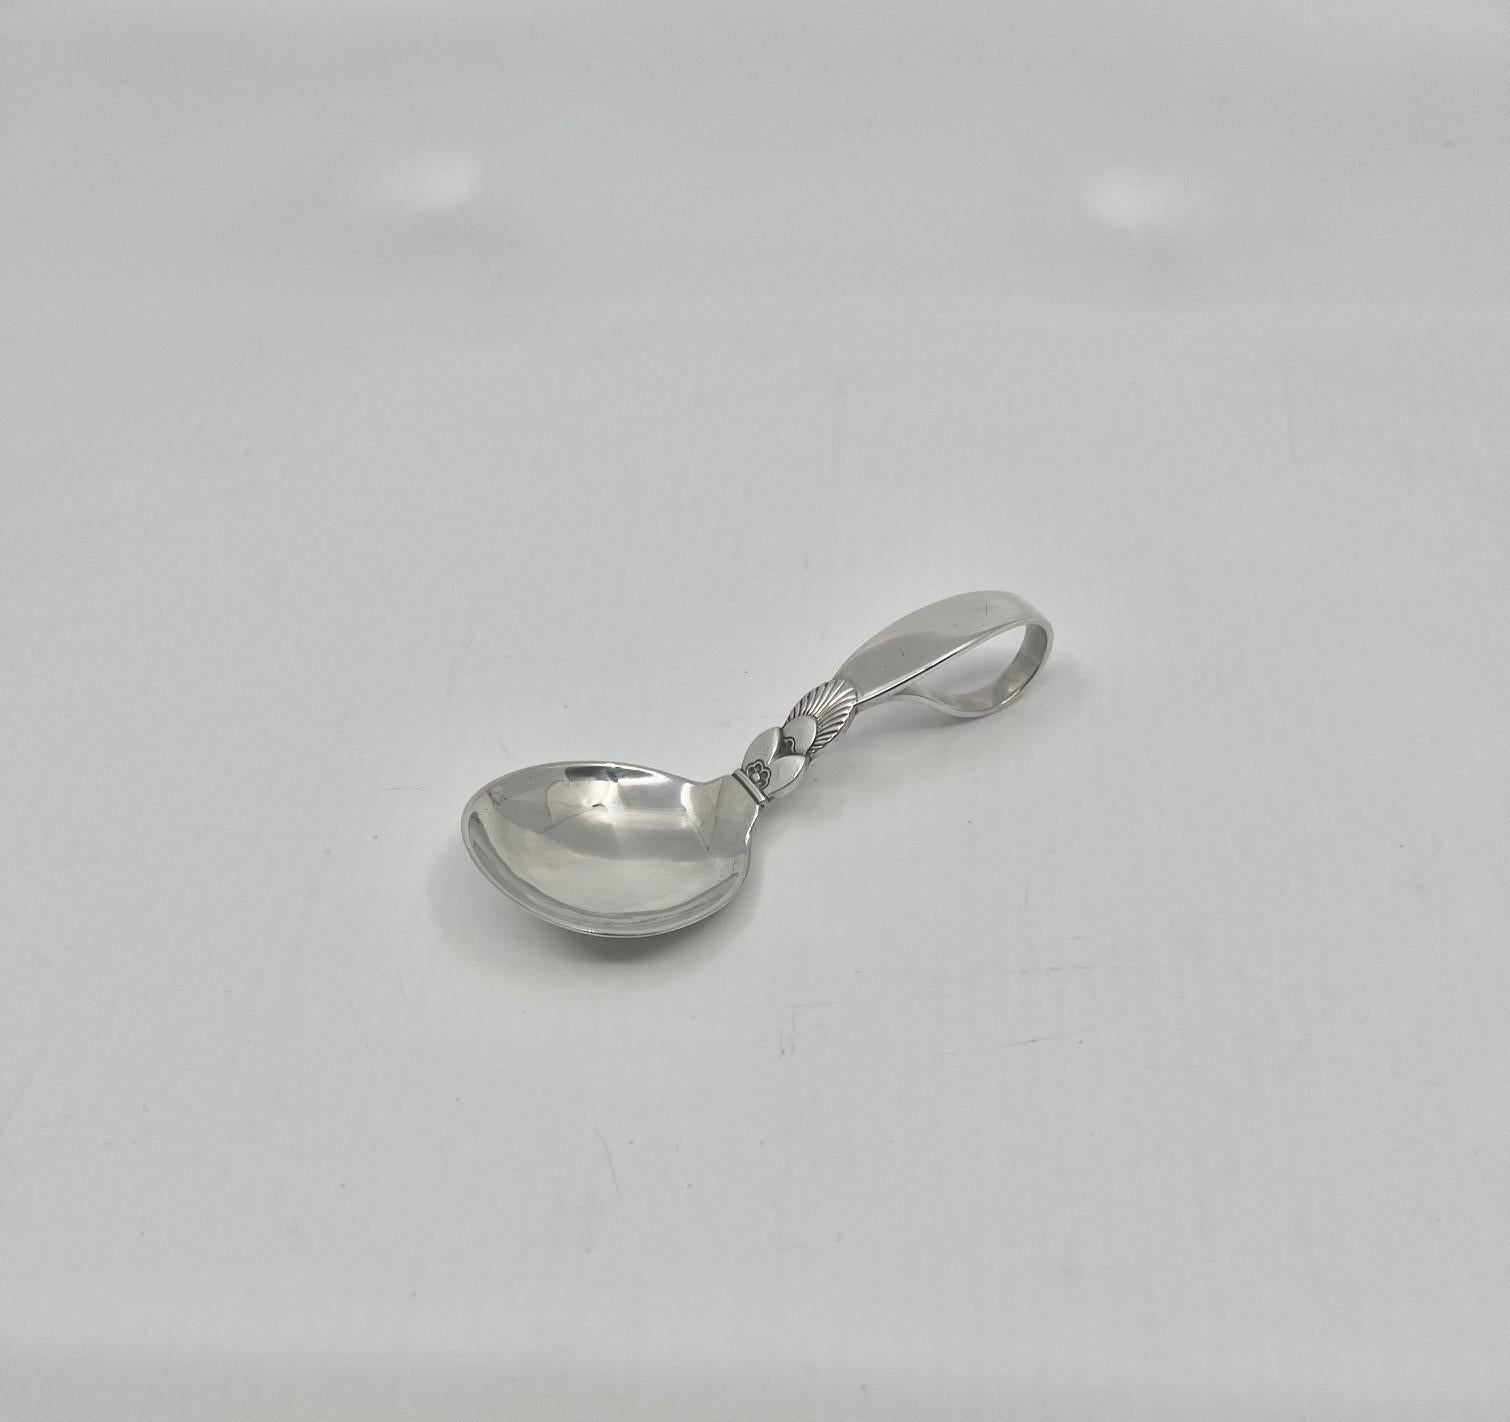 A Georg Jensen sterling silver baby spoon with curved handle, item 095 in the Cactus pattern, design #30 by Gundorph Albertus from 1930.

Additional information:
Material: Sterling silver
Styles: Art Deco
Hallmarks: With Georg Jensen hallmark, made